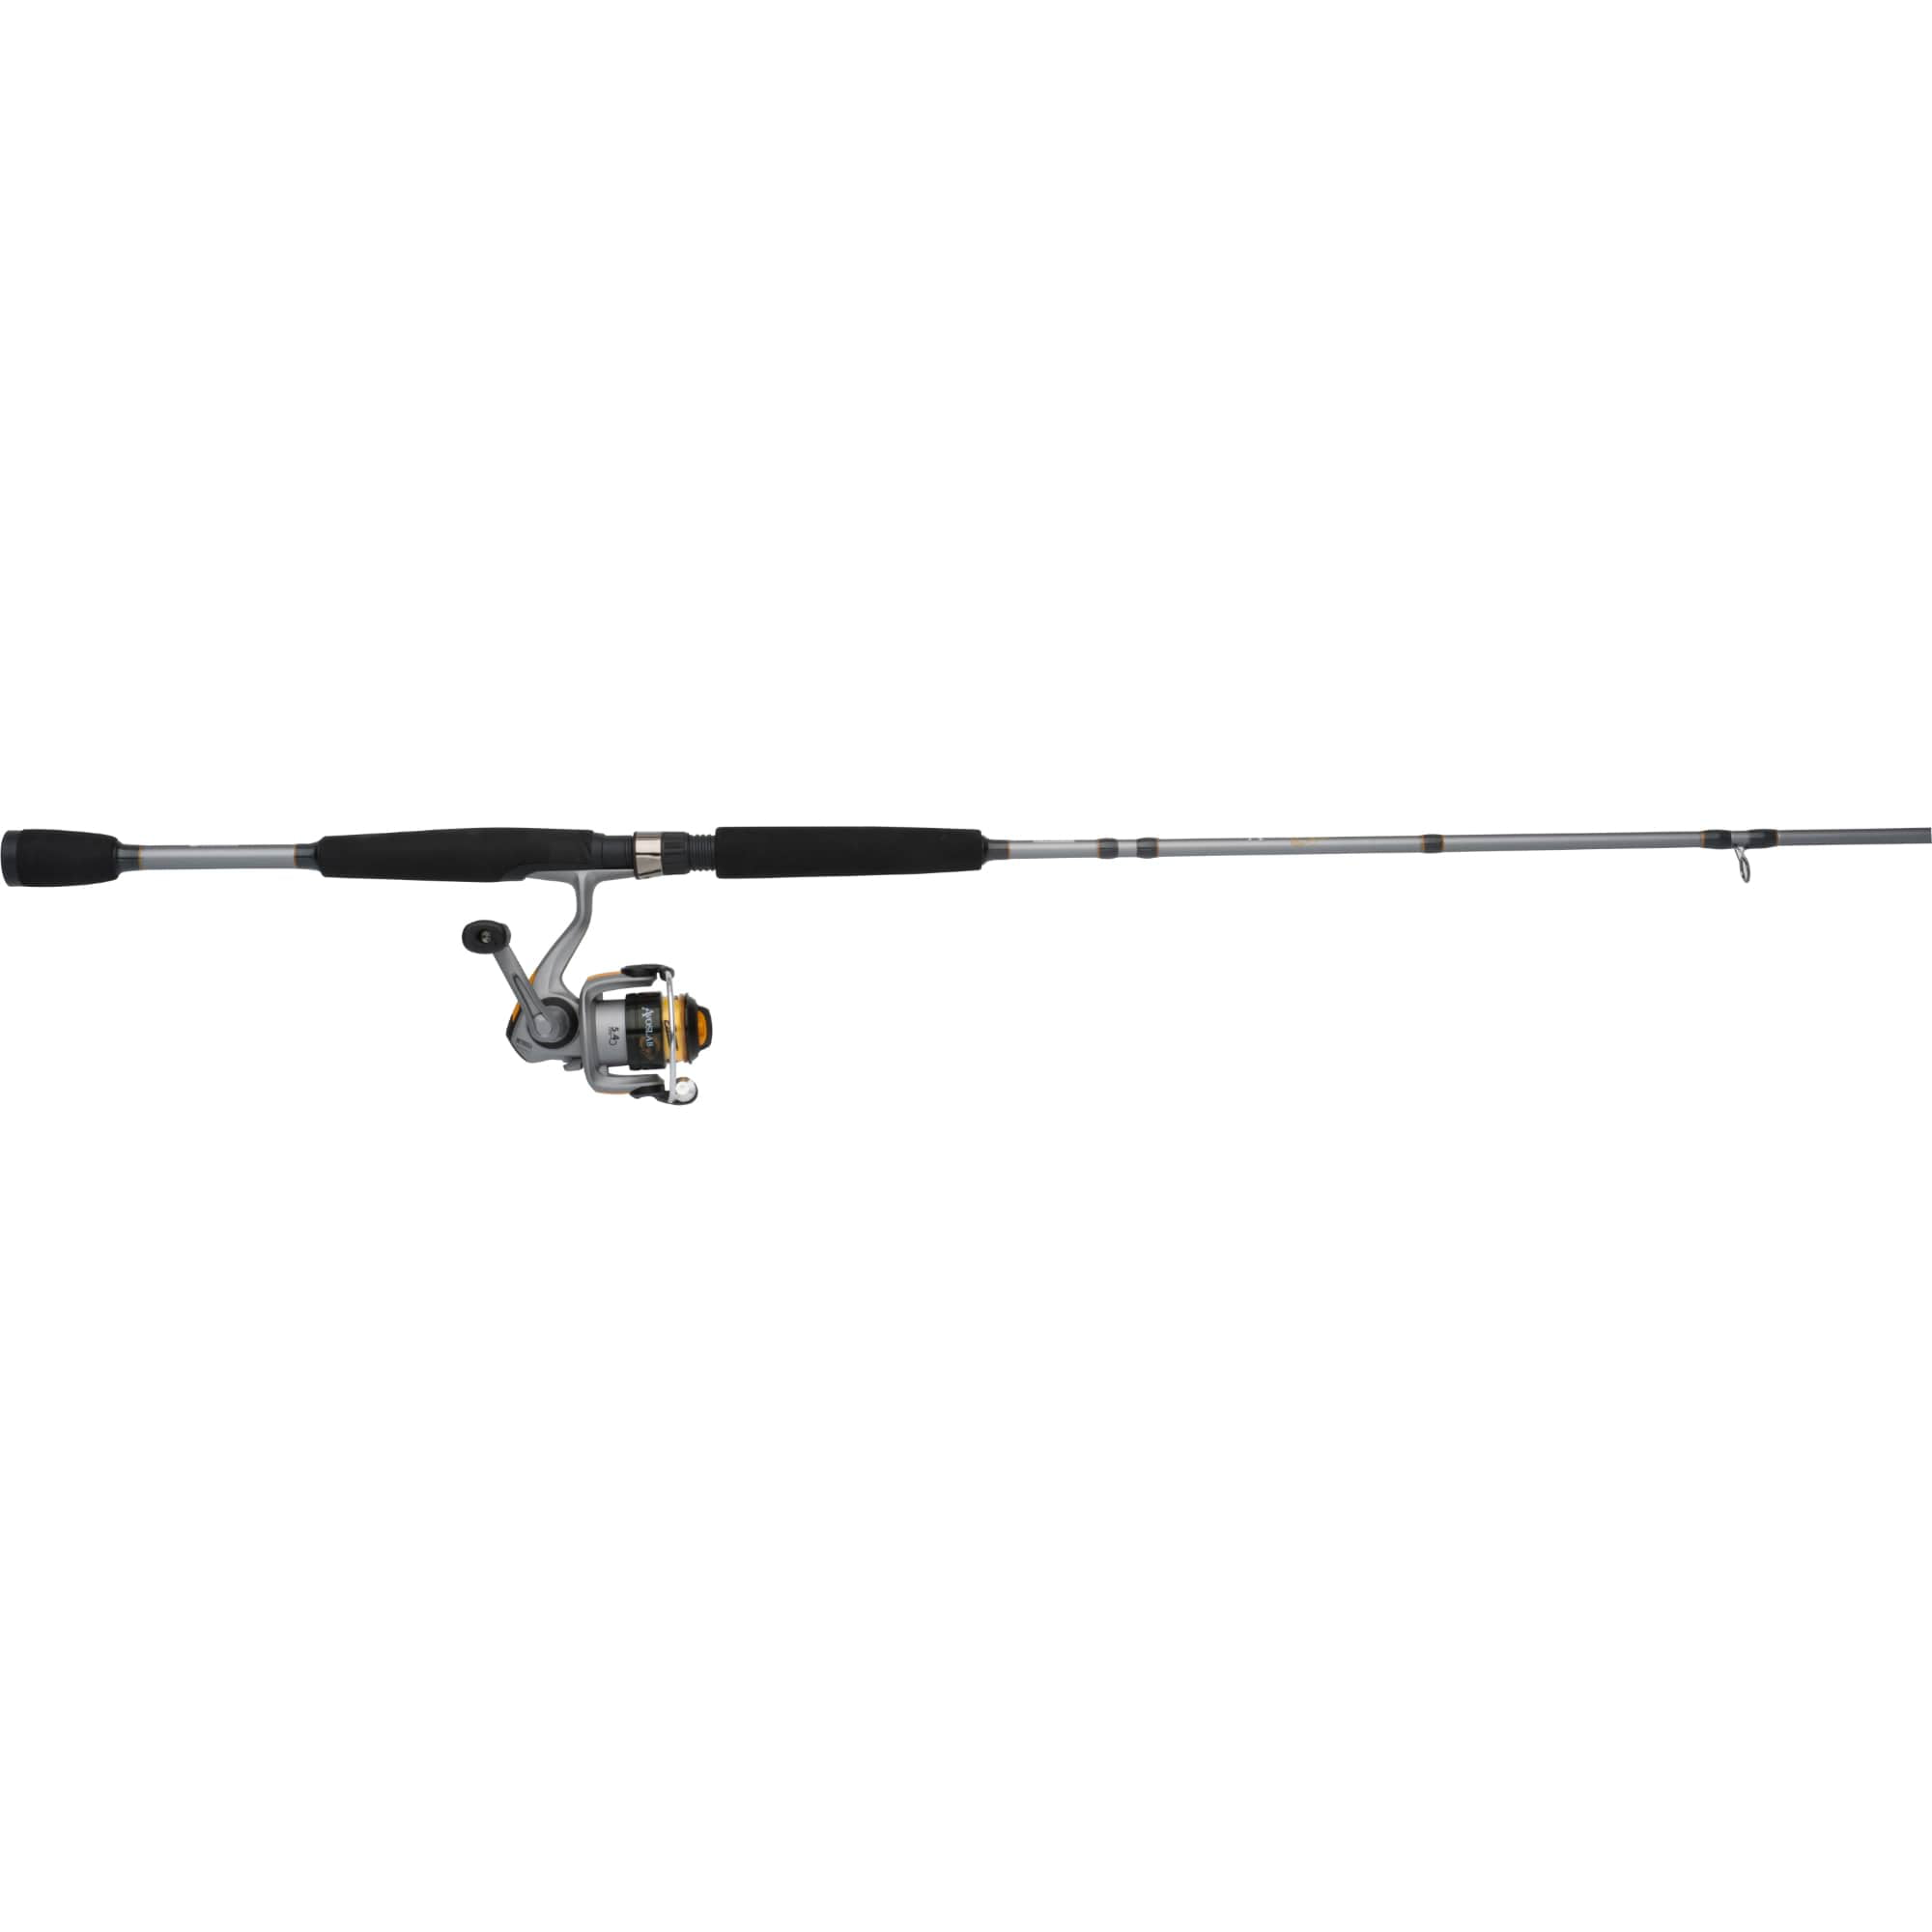 Mitchell AvoTrout Spinning Reel and Fishing Rod Combo - Walmart